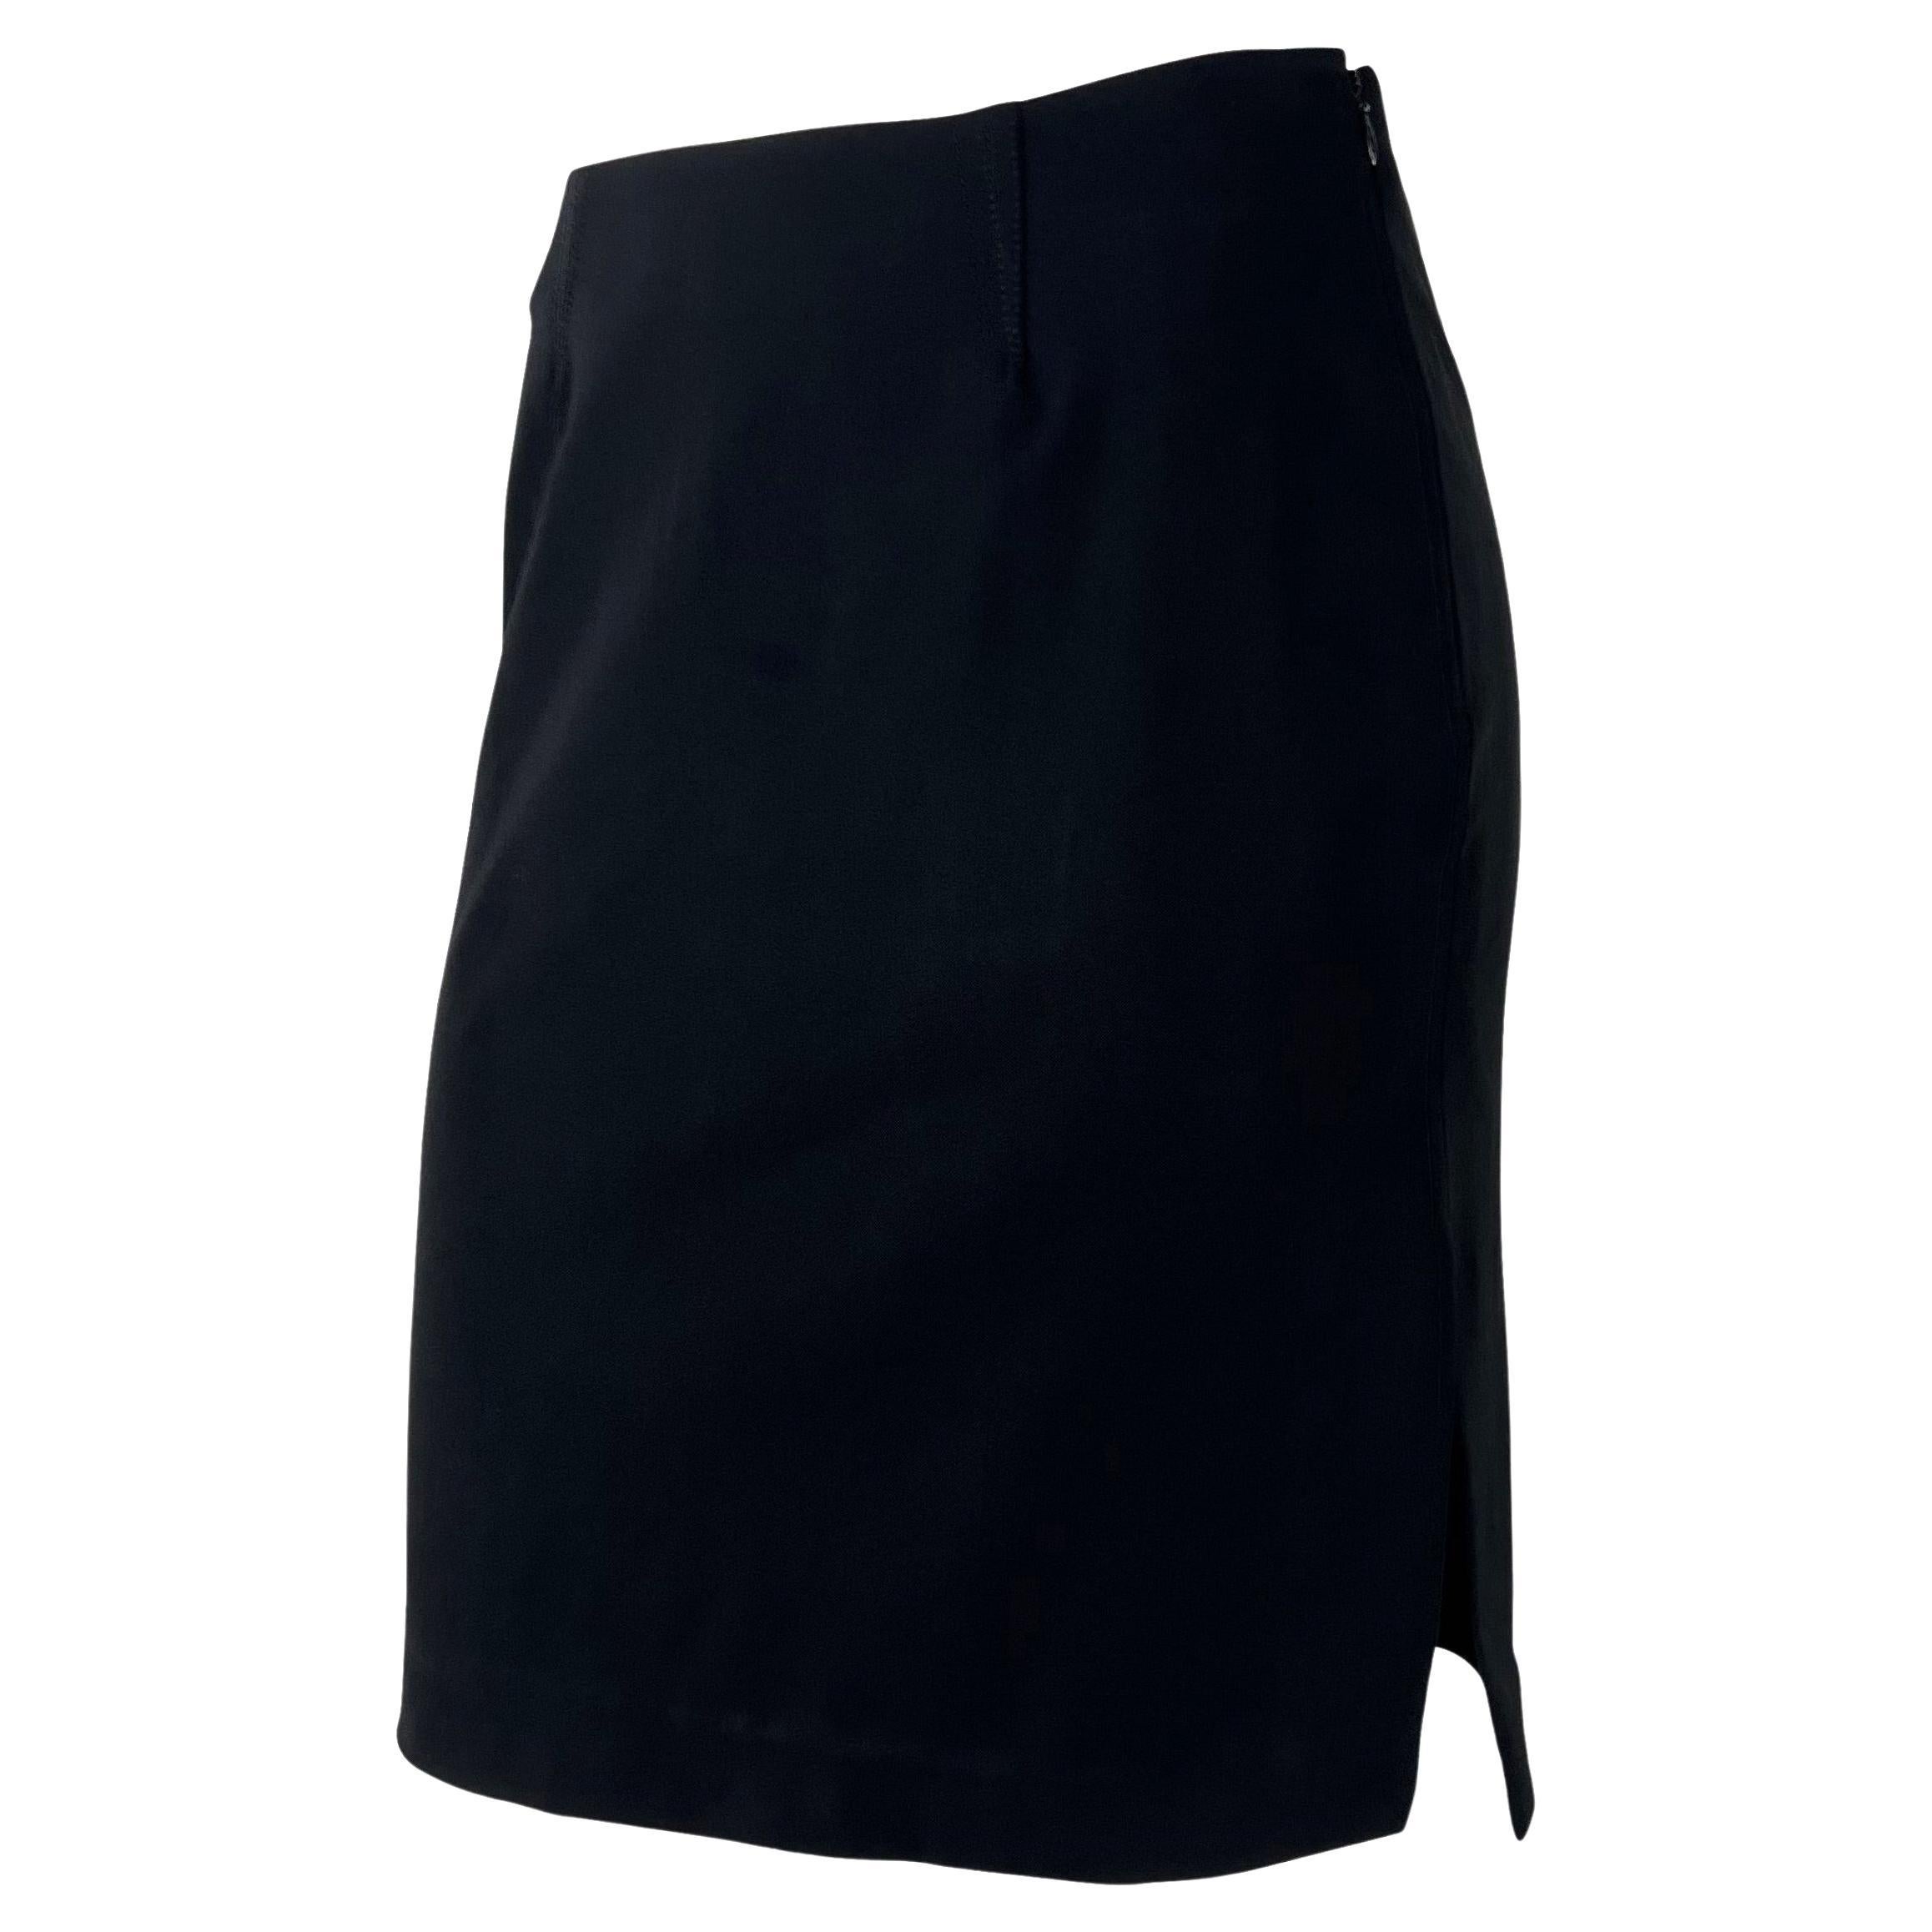 TheRealList presents: a black Gucci skirt, designed by Tom Ford. From 1997, this classic black skirt features short pleats at the top of the skirt and is made complete with a slit at the side. Why have any other black skirt when it can be Gucci by